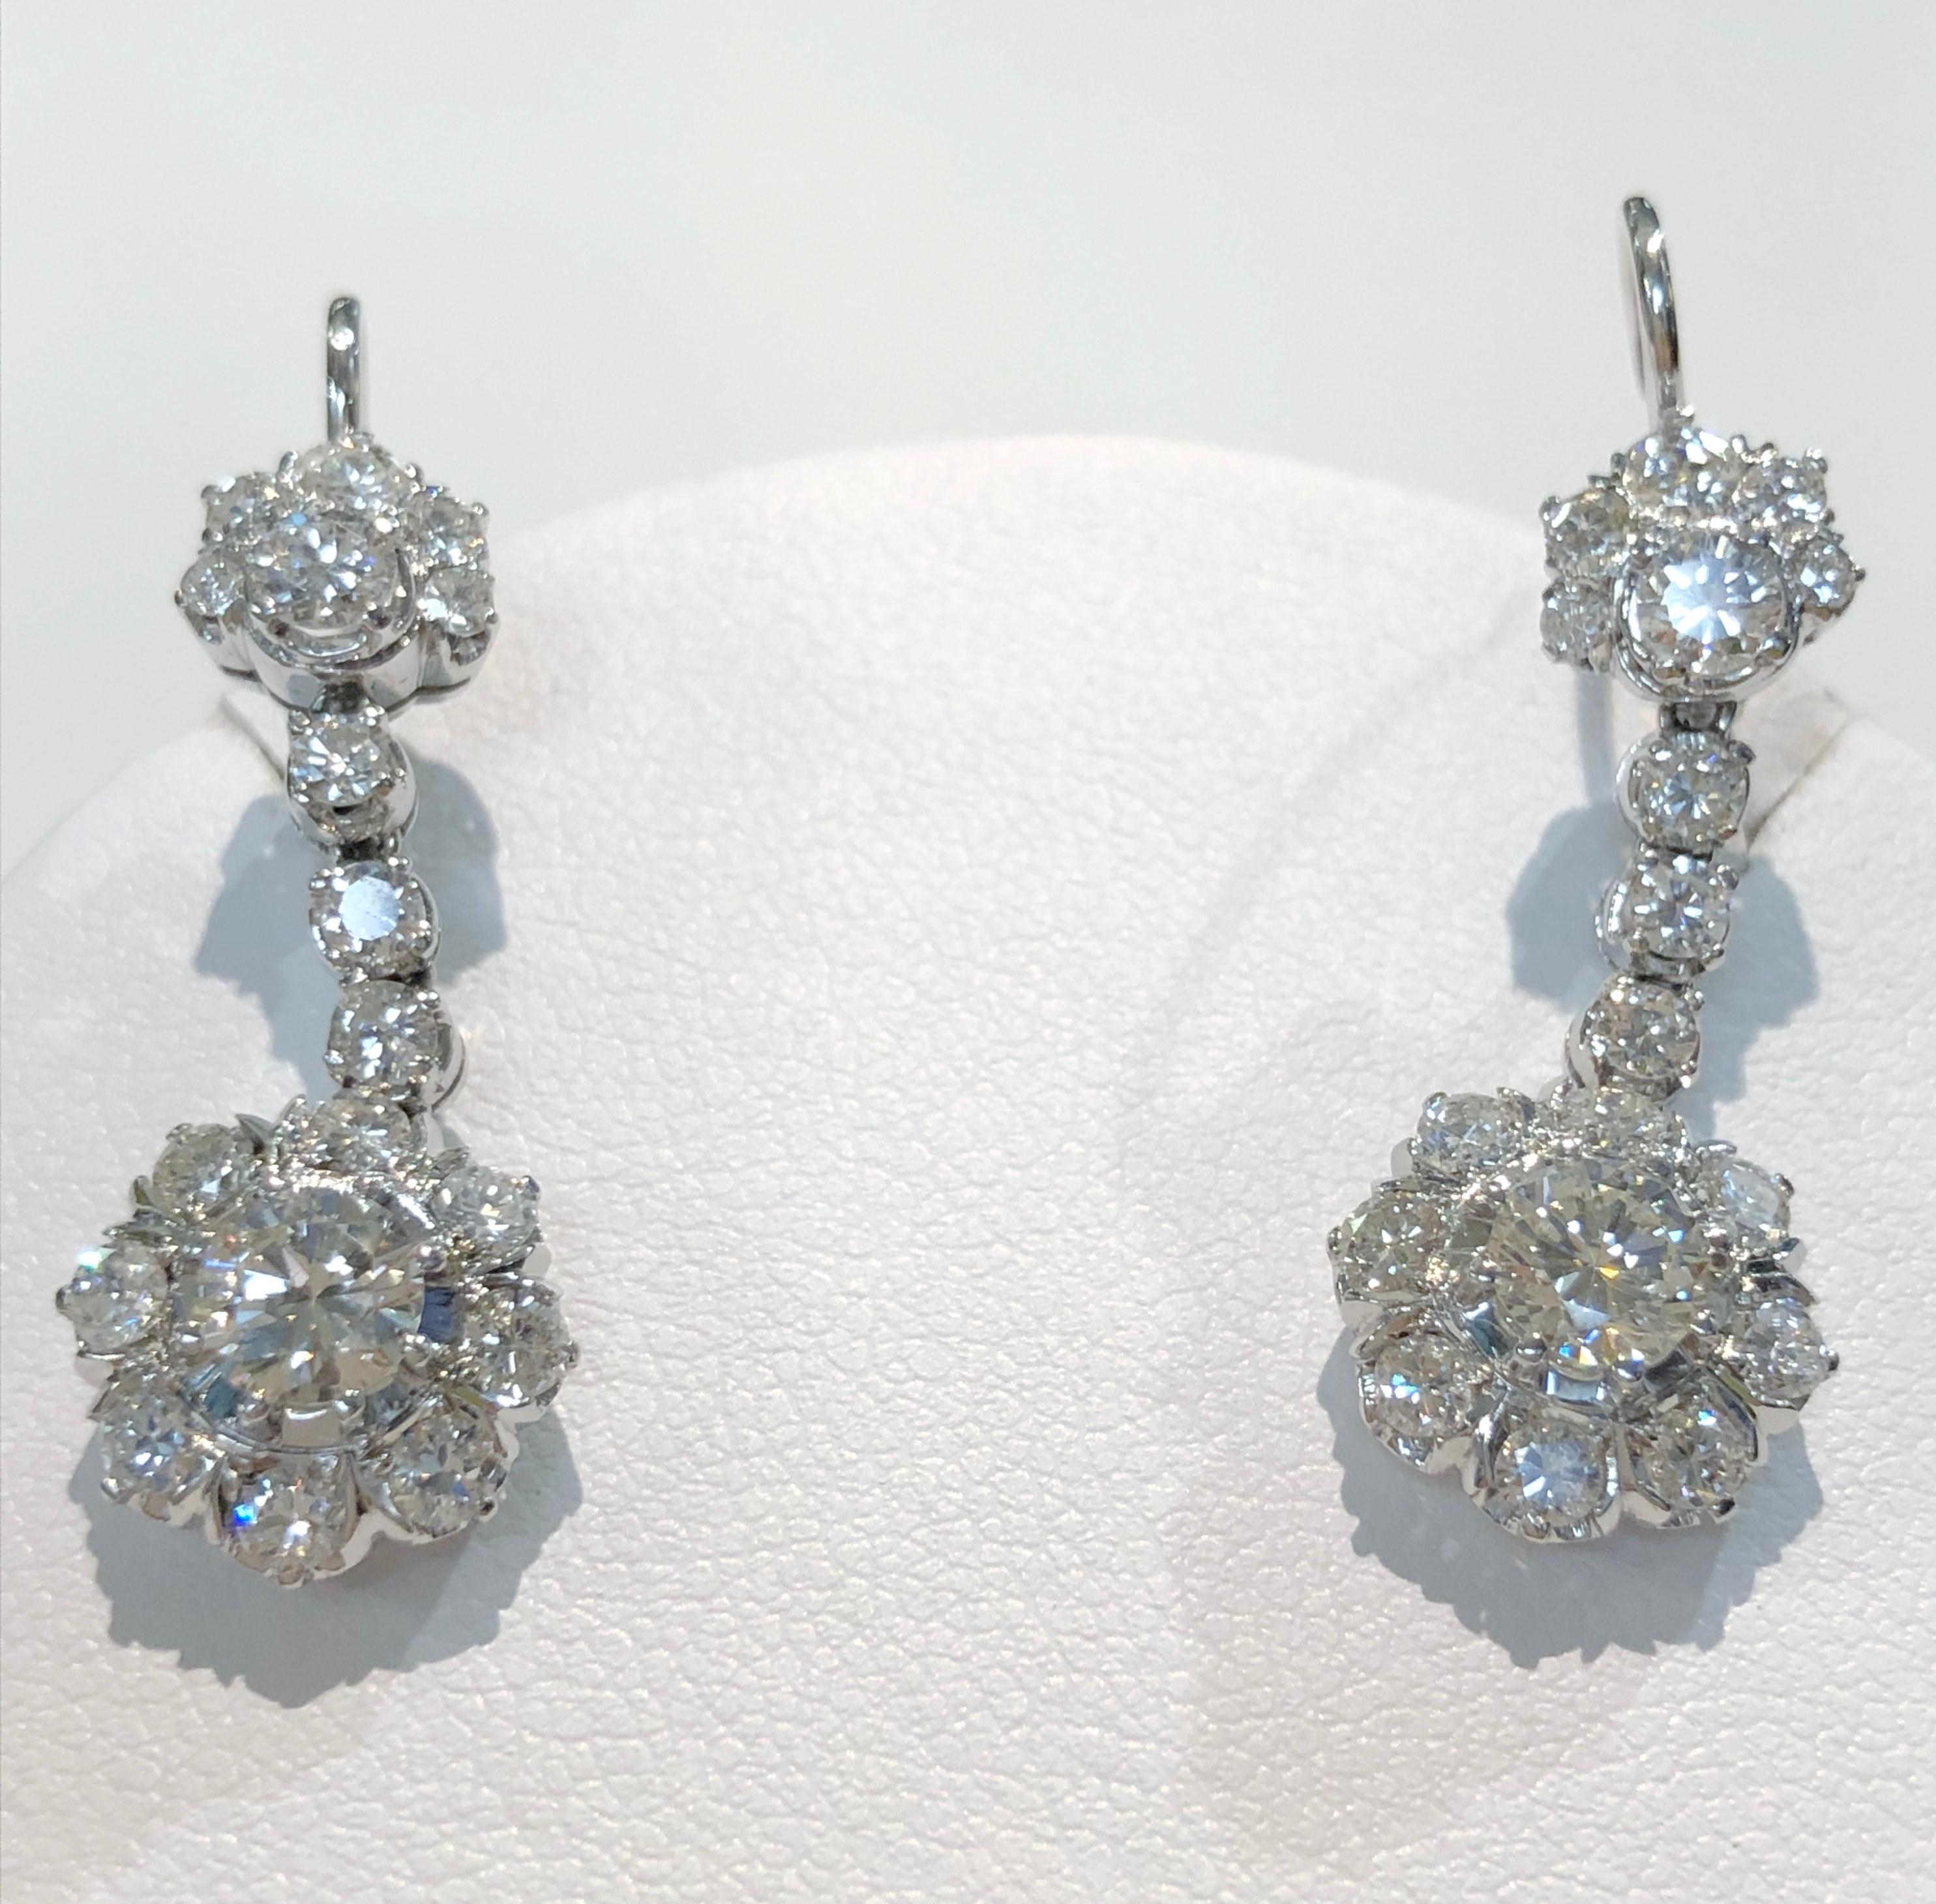 Brilliant Cut Pair of 18 Karat White Gold and Diamond Earrings For Sale